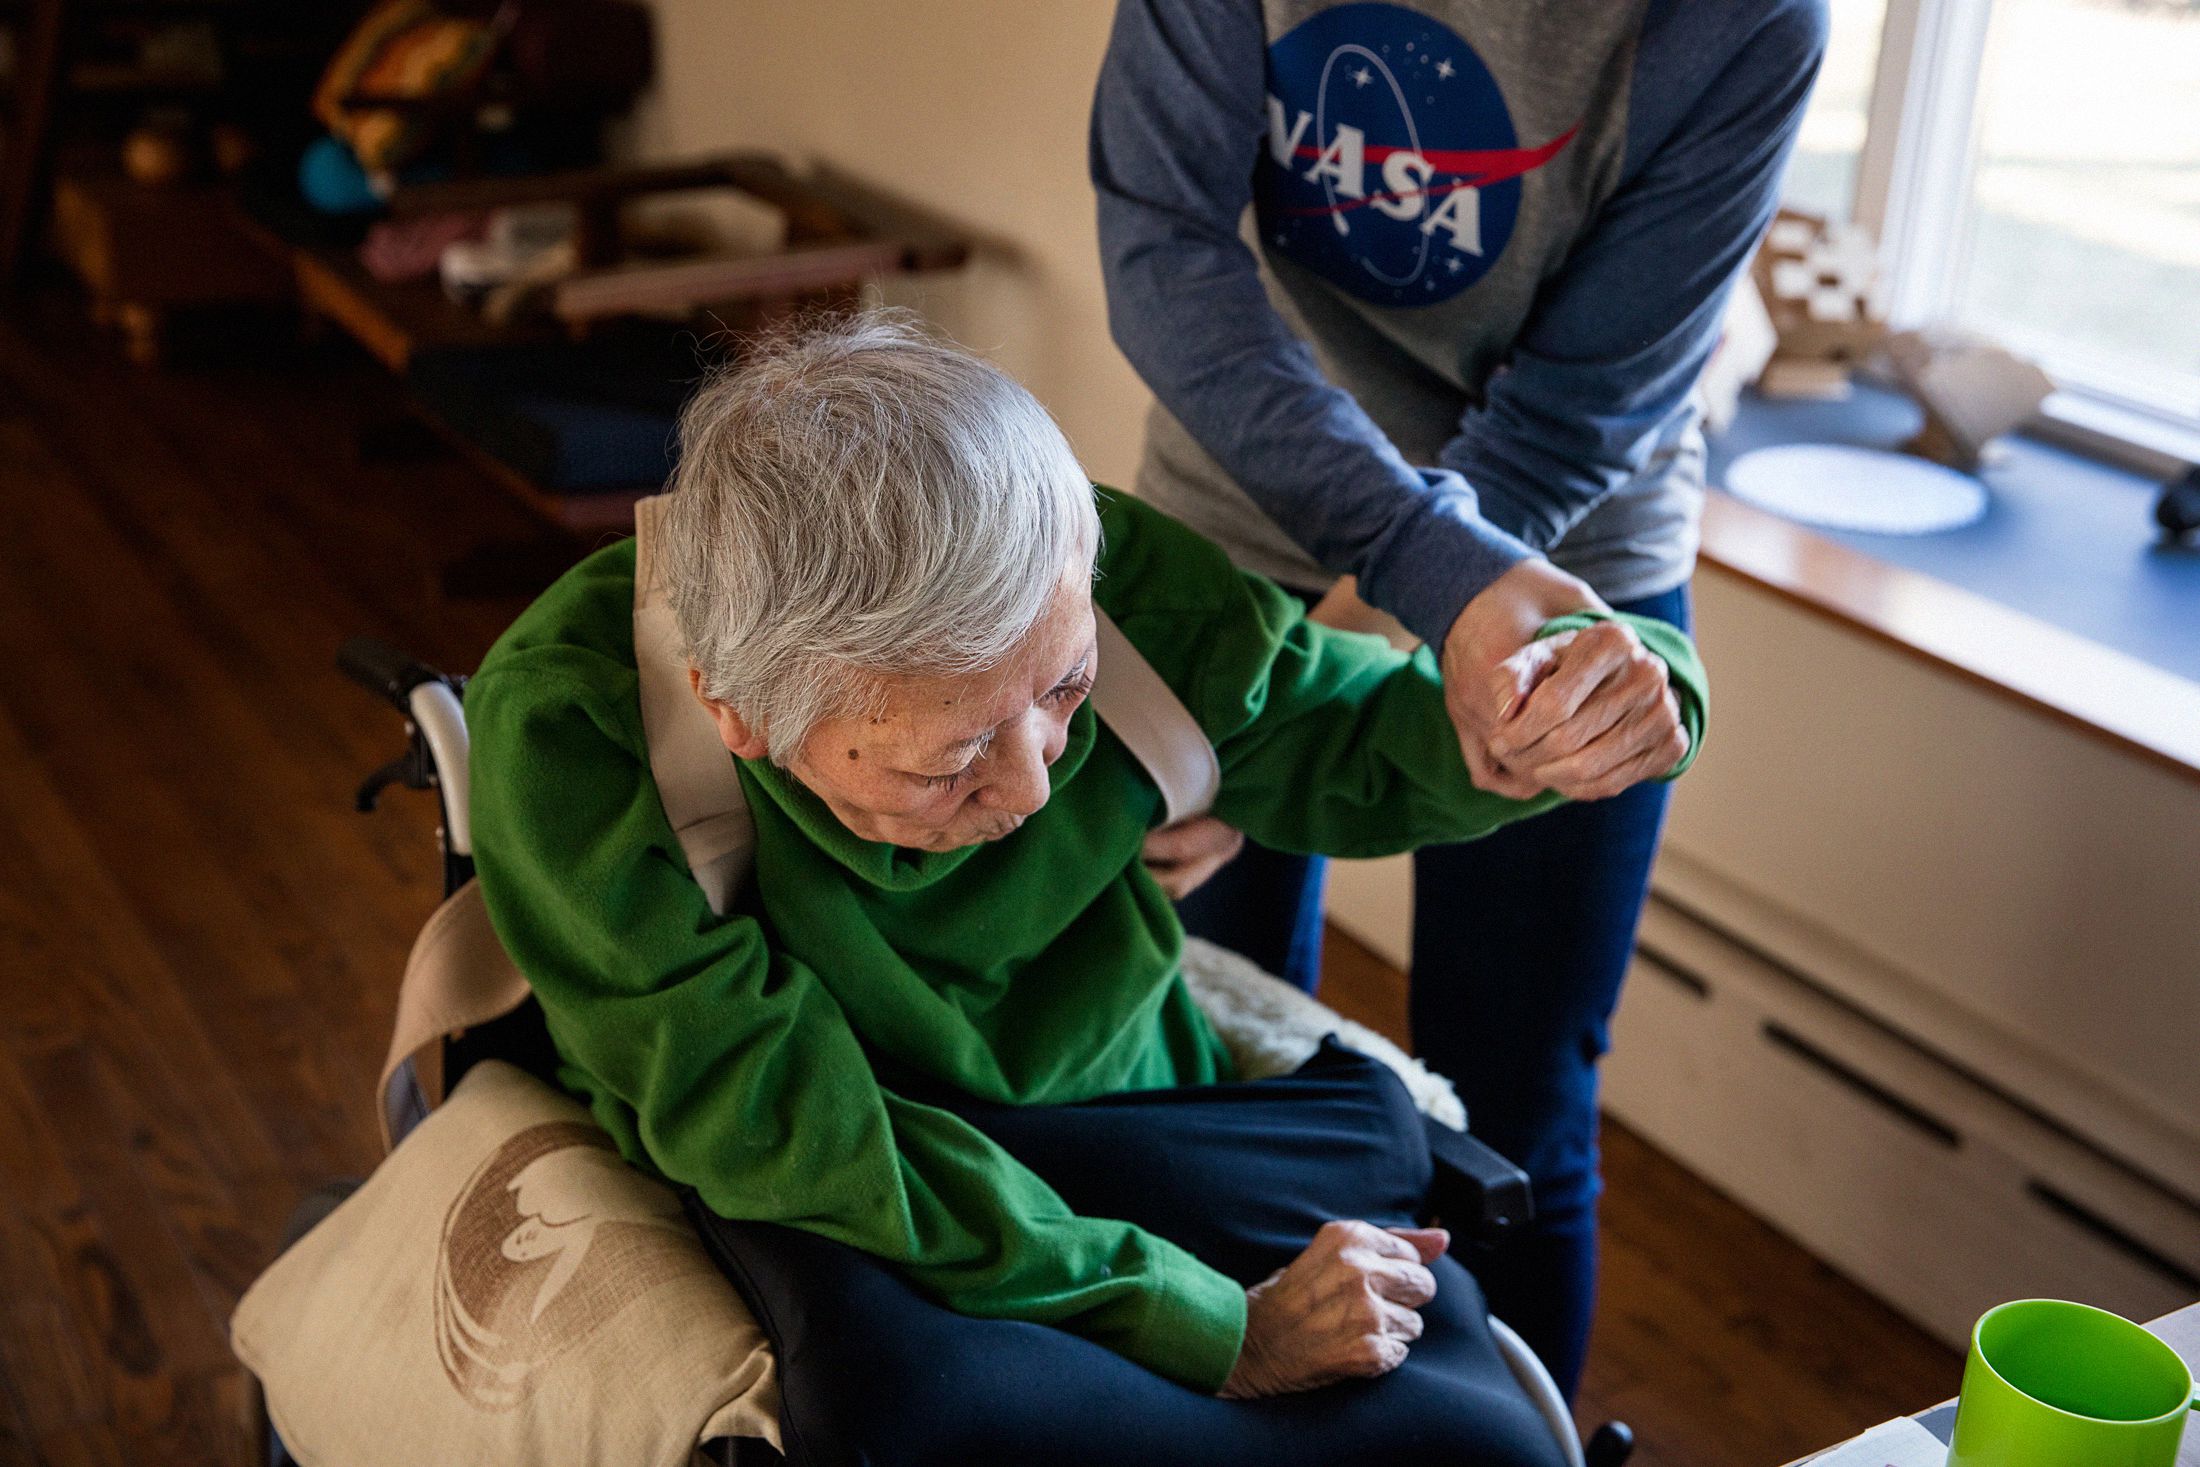 In Greenlawn, N.Y., home health aide Natalia Hubbard helps her client, Noriko Morimoto, who is 82 years old and has Parkinson’s.